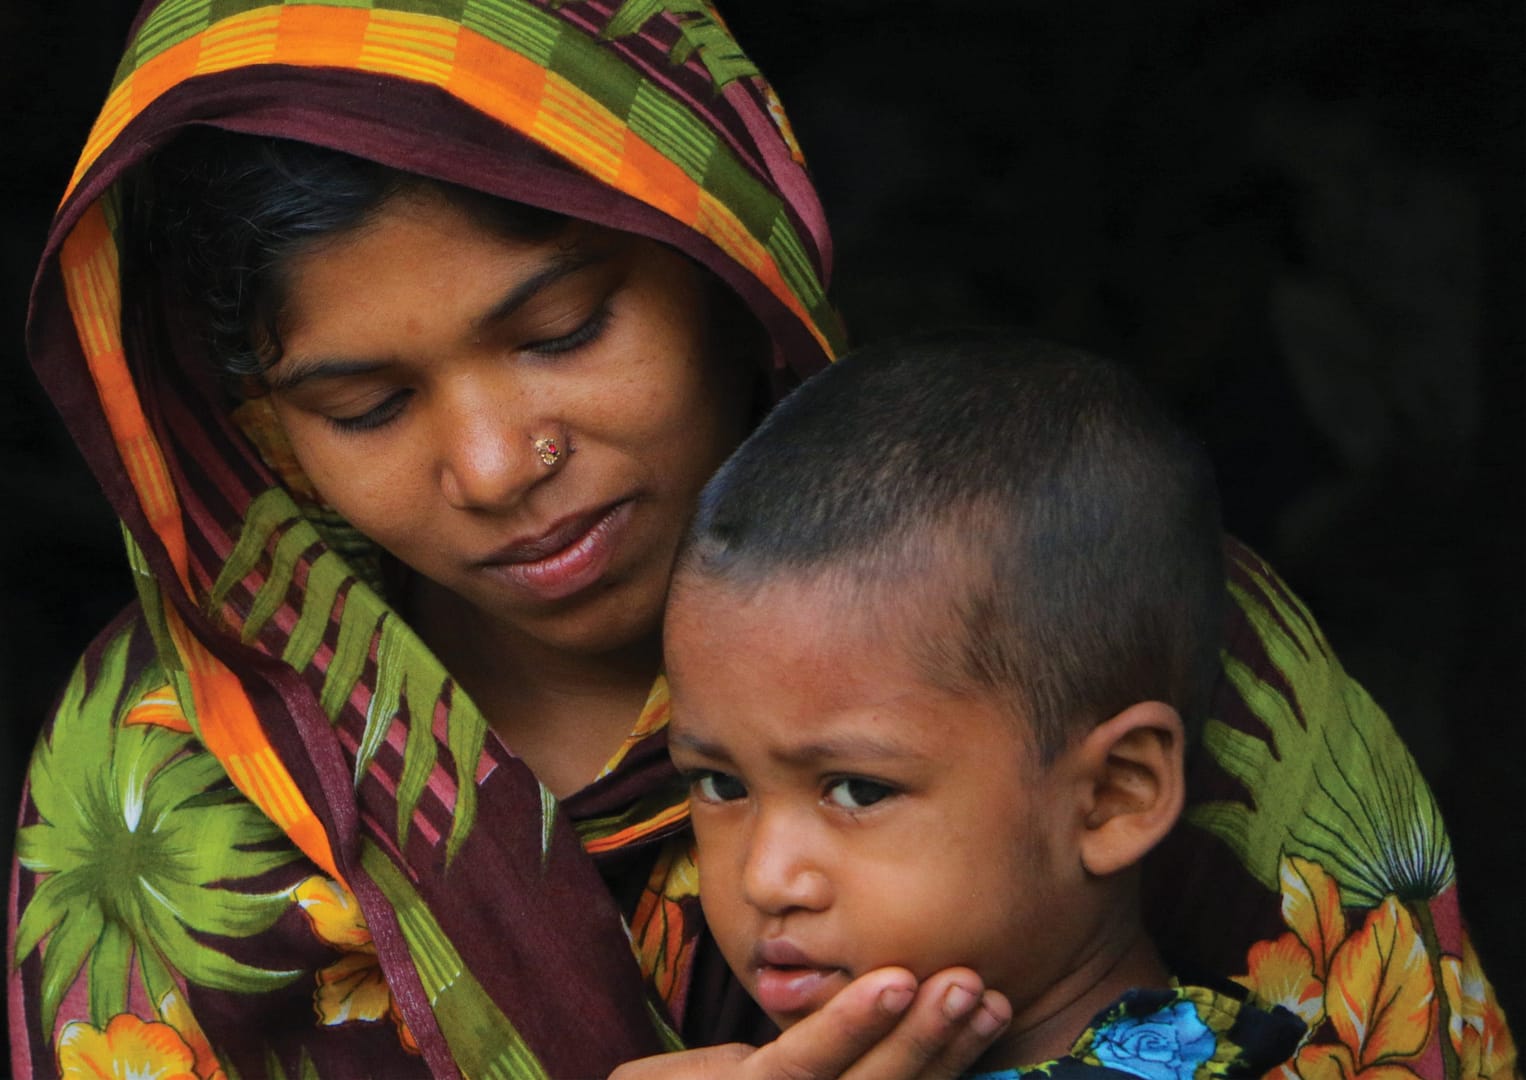 New coalition of private donors will work as a community of impact to end malnutrition